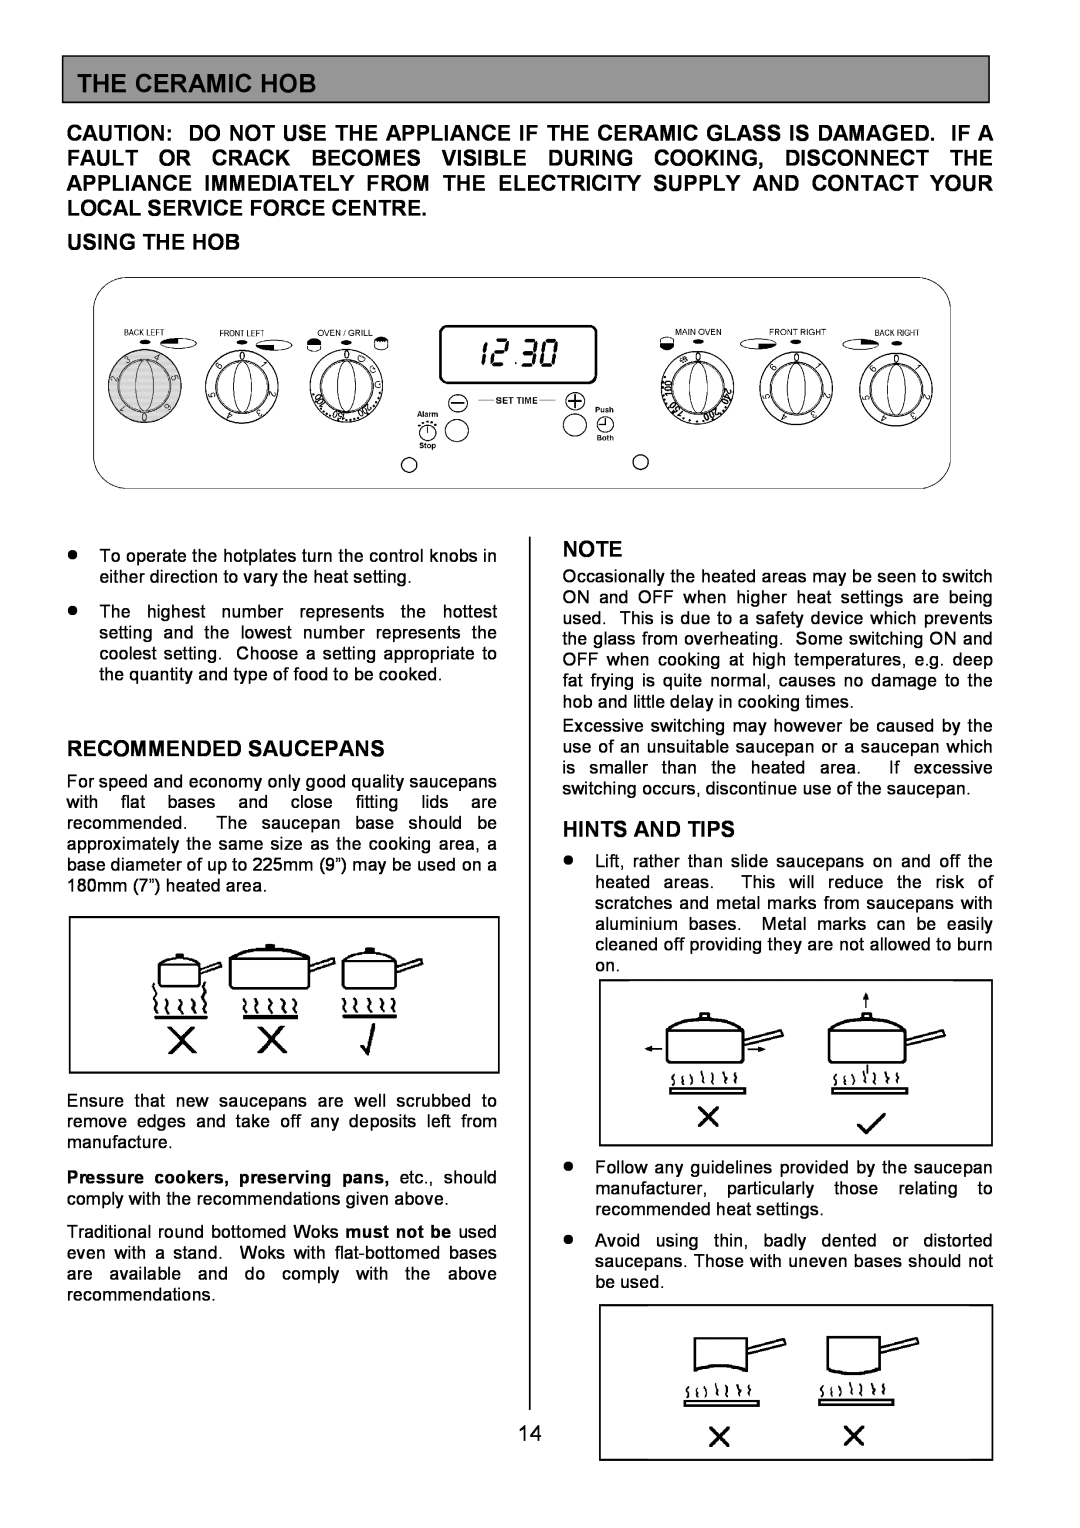 Tricity Bendix SE505 installation instructions The Ceramic Hob, Using The Hob, Recommended Saucepans, Hints And Tips 